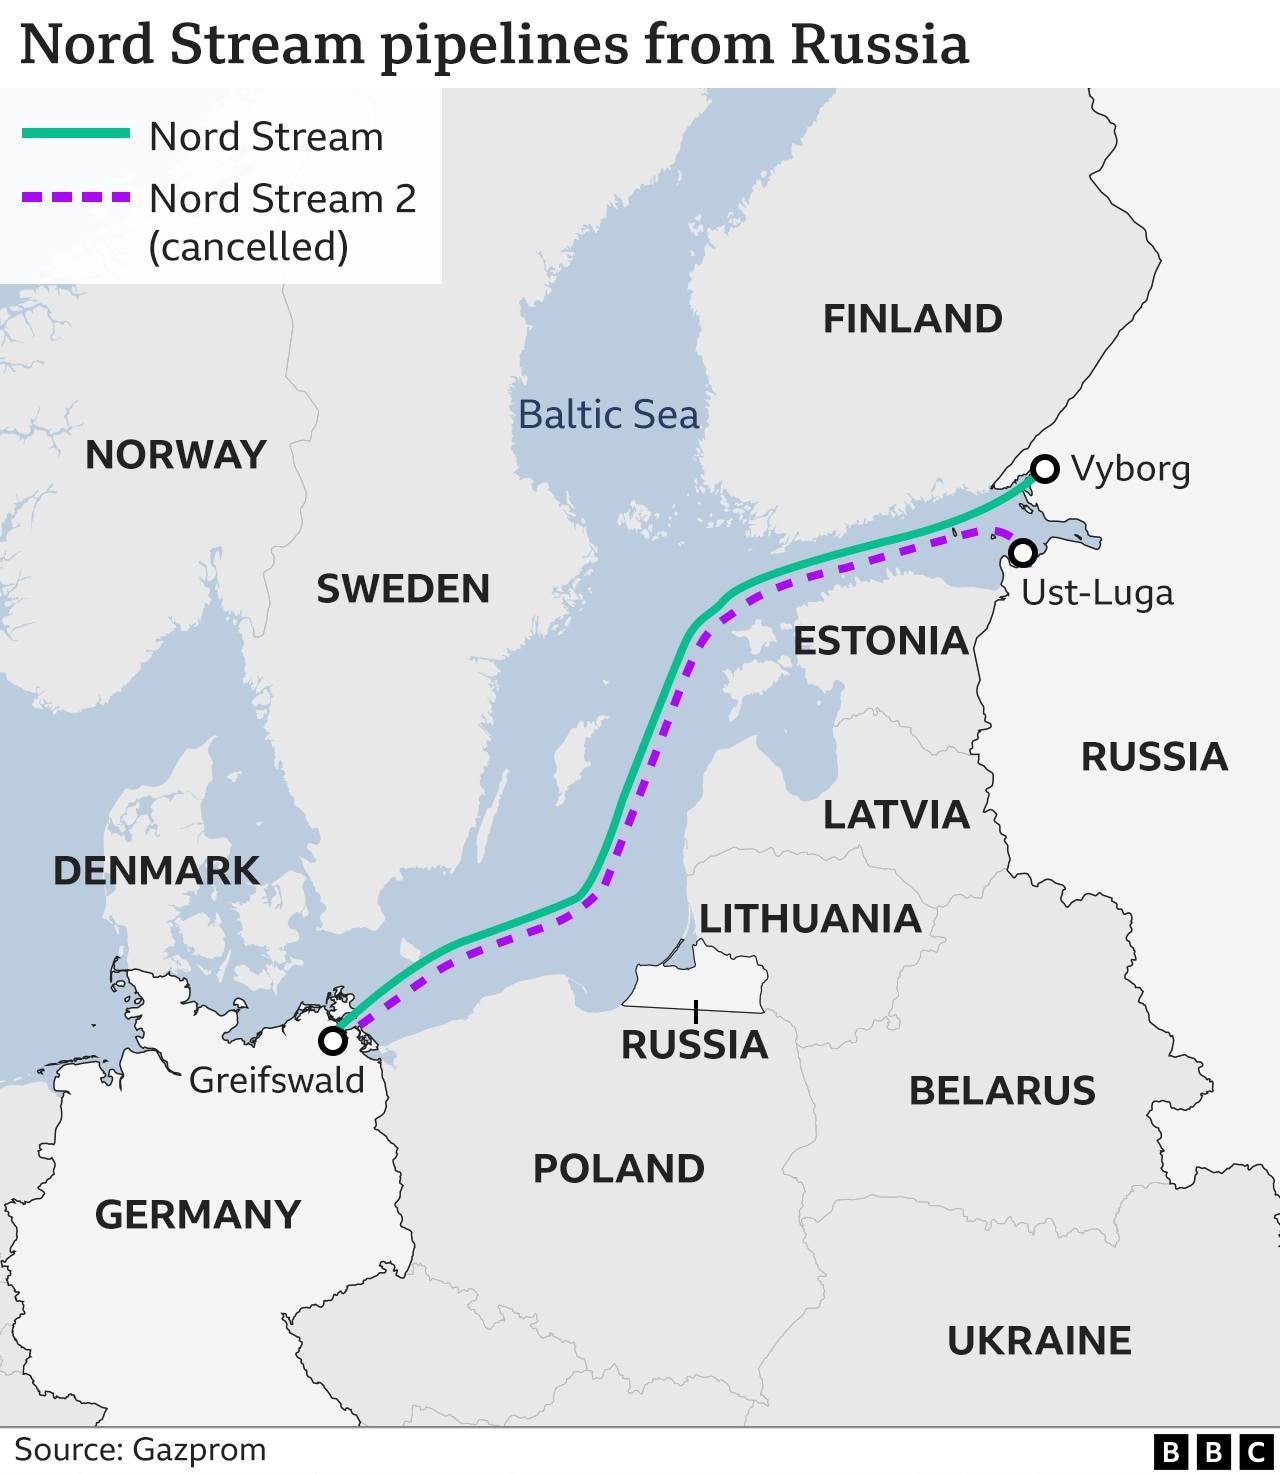 May be an image of map and text that says 'Nord Stream pipelines from Russia Nord Stream Nord Stream 2 (cancelled) NORWAY FINLAND Baltic Sea SWEDEN Vyborg Ust-Luga ESTONIA DENMARK RUSSIA LATVIA LITHUANIA Greifswald RUSSIA GERMANY BELARUS POLAND Source: Gazprom UKRAINE'